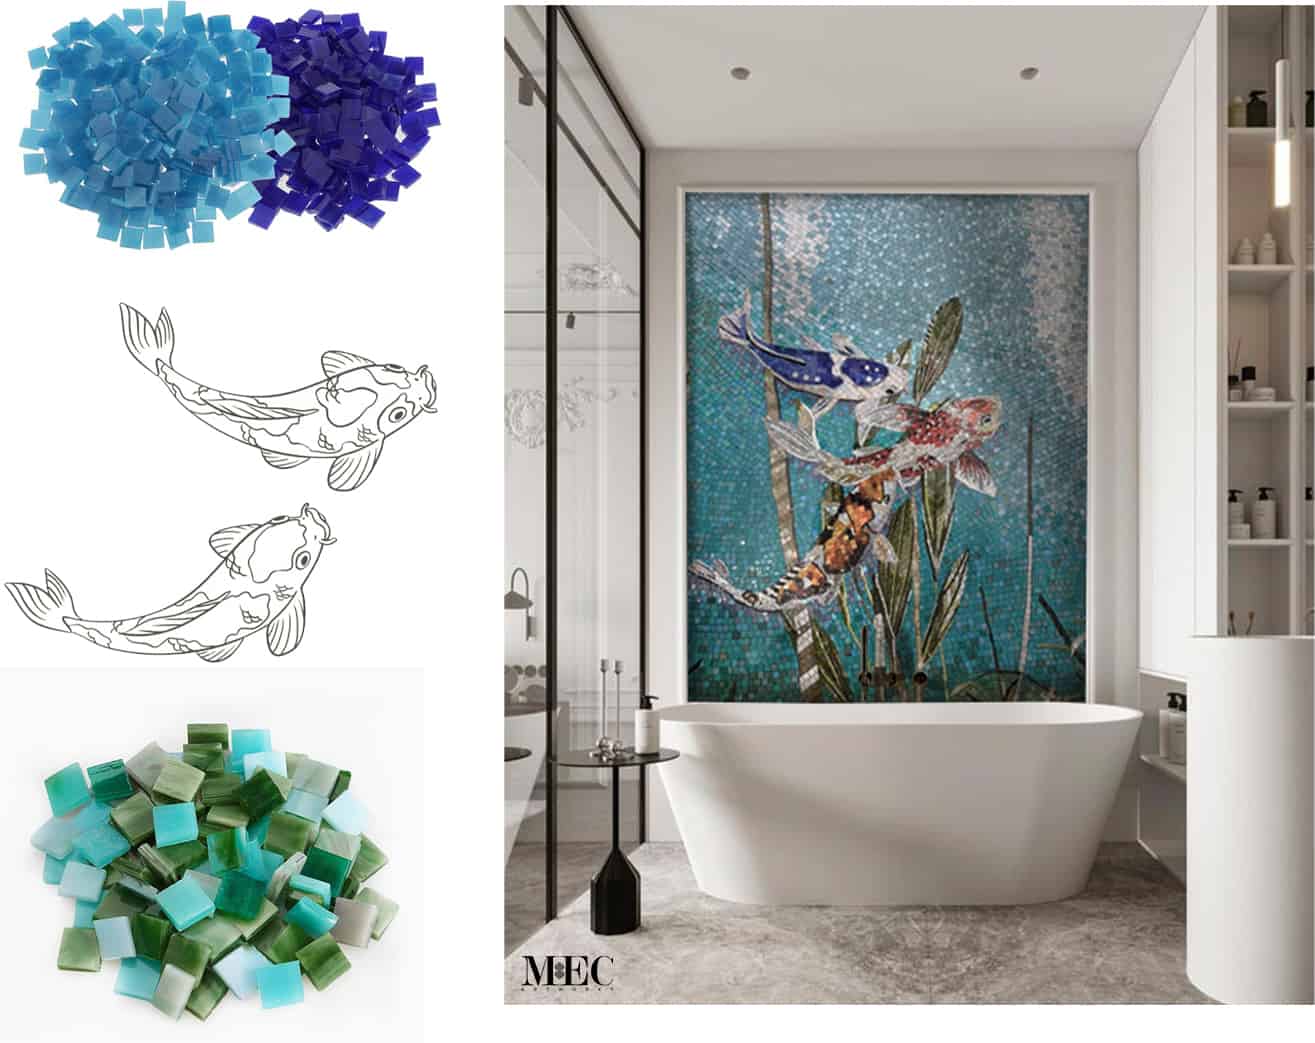 A collage of two images showing a shower wall mosaic art inspired by fish. The right image shows a realistic view of a white bathtub with a curved faucet and a shower head, surrounded by a wall of blue and turquoise fish-shaped mosaics. The left image shows a digital design of the same wall, and mosaic of different shades of blue and turquoise.